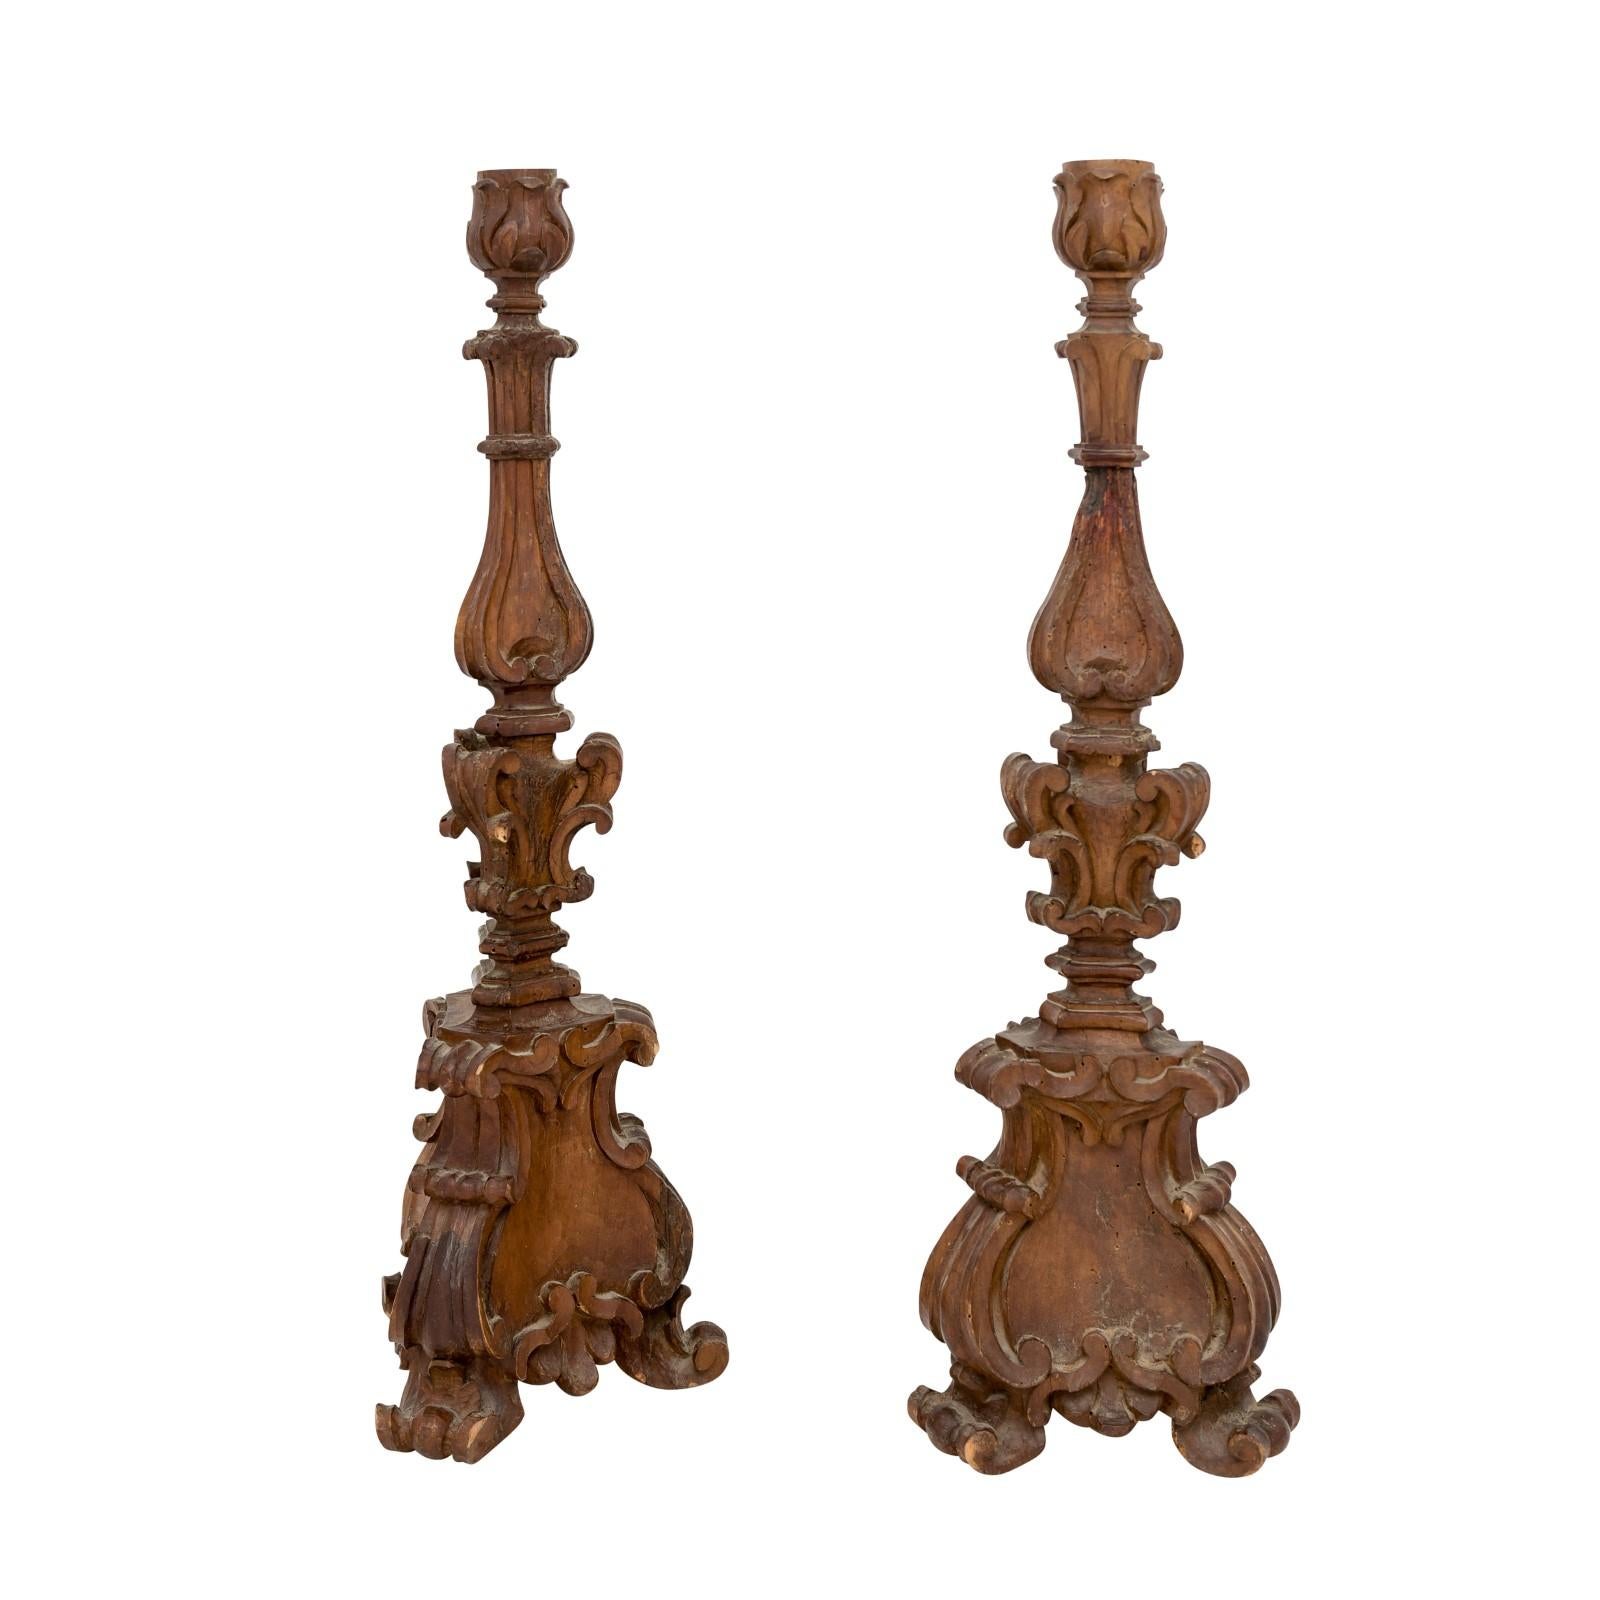 A pair of Italian Baroque period carved wooden candlesticks with acanthus leaves, volutes, carved scrolling feet and great rustic character. Featuring a pair of Italian Baroque period carved wooden altar candlesticks, effortlessly radiating an air